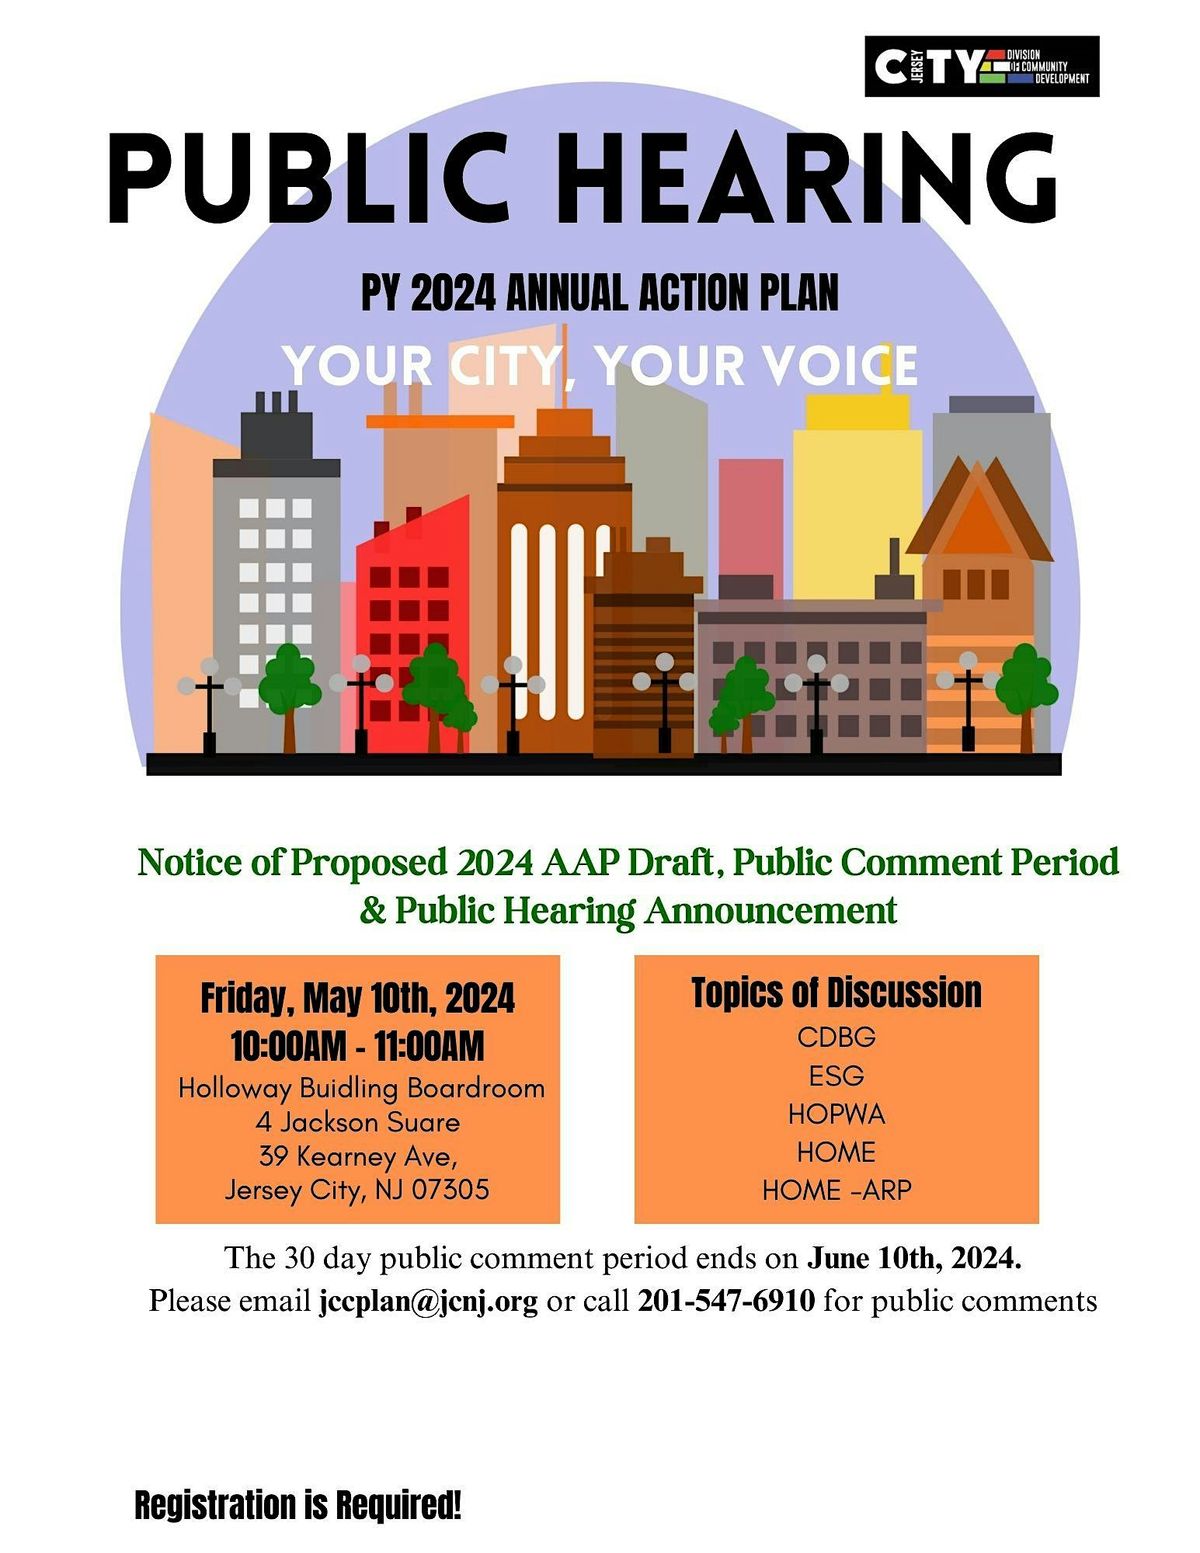 PY 2024 Annual Action Plan Public Hearing